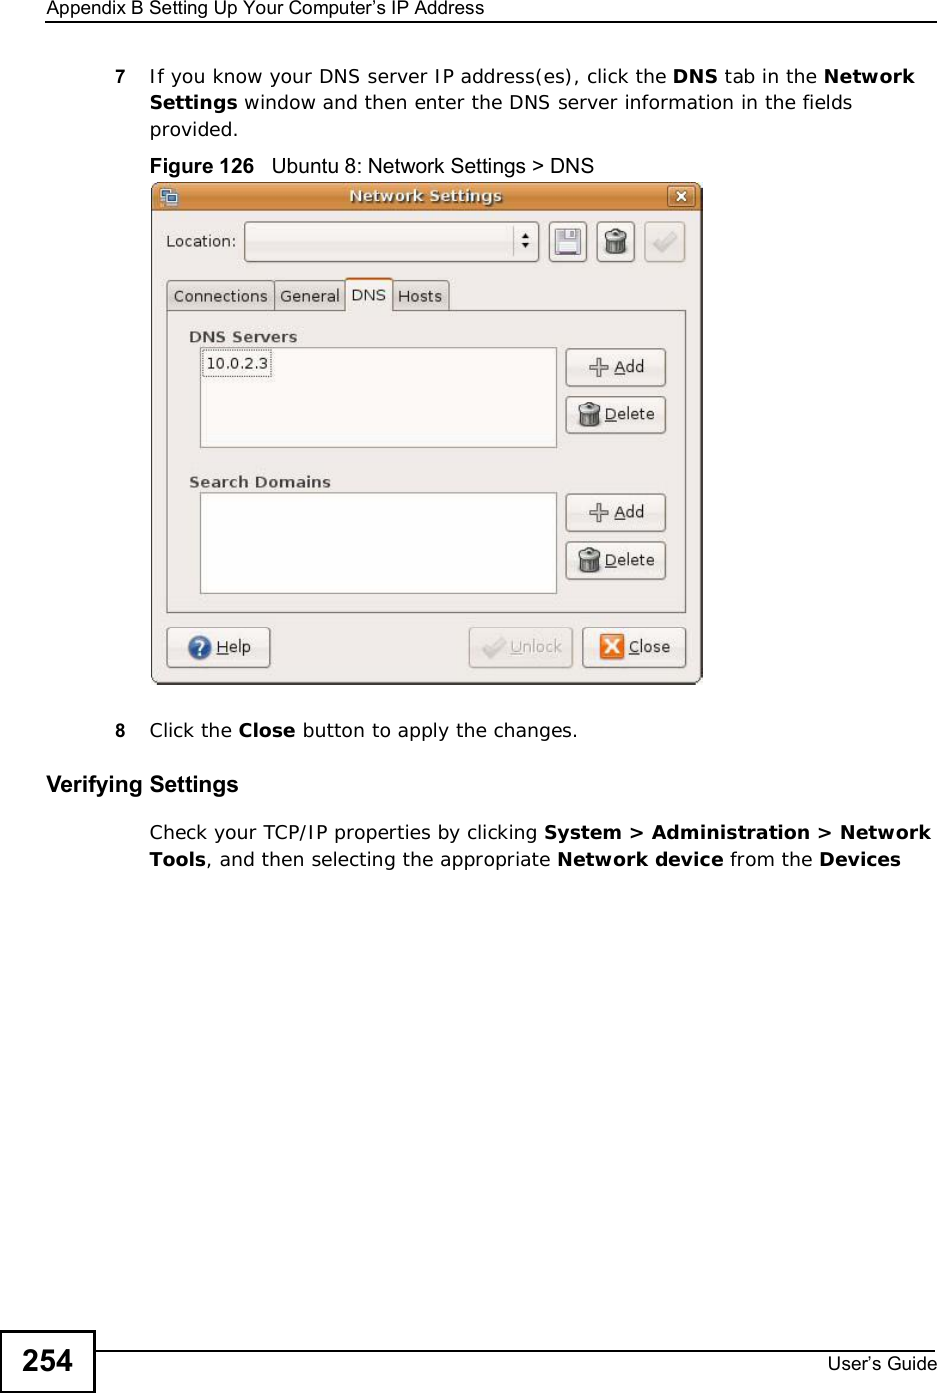 Appendix BSetting Up Your Computer s IP AddressUser s Guide2547If you know your DNS server IP address(es), click the DNS tab in the Network Settings window and then enter the DNS server information in the fields provided. Figure 126   Ubuntu 8: Network Settings &gt; DNS  8Click the Close button to apply the changes.Verifying SettingsCheck your TCP/IP properties by clicking System &gt; Administration &gt; Network Tools, and then selecting the appropriate Network device from the Devices